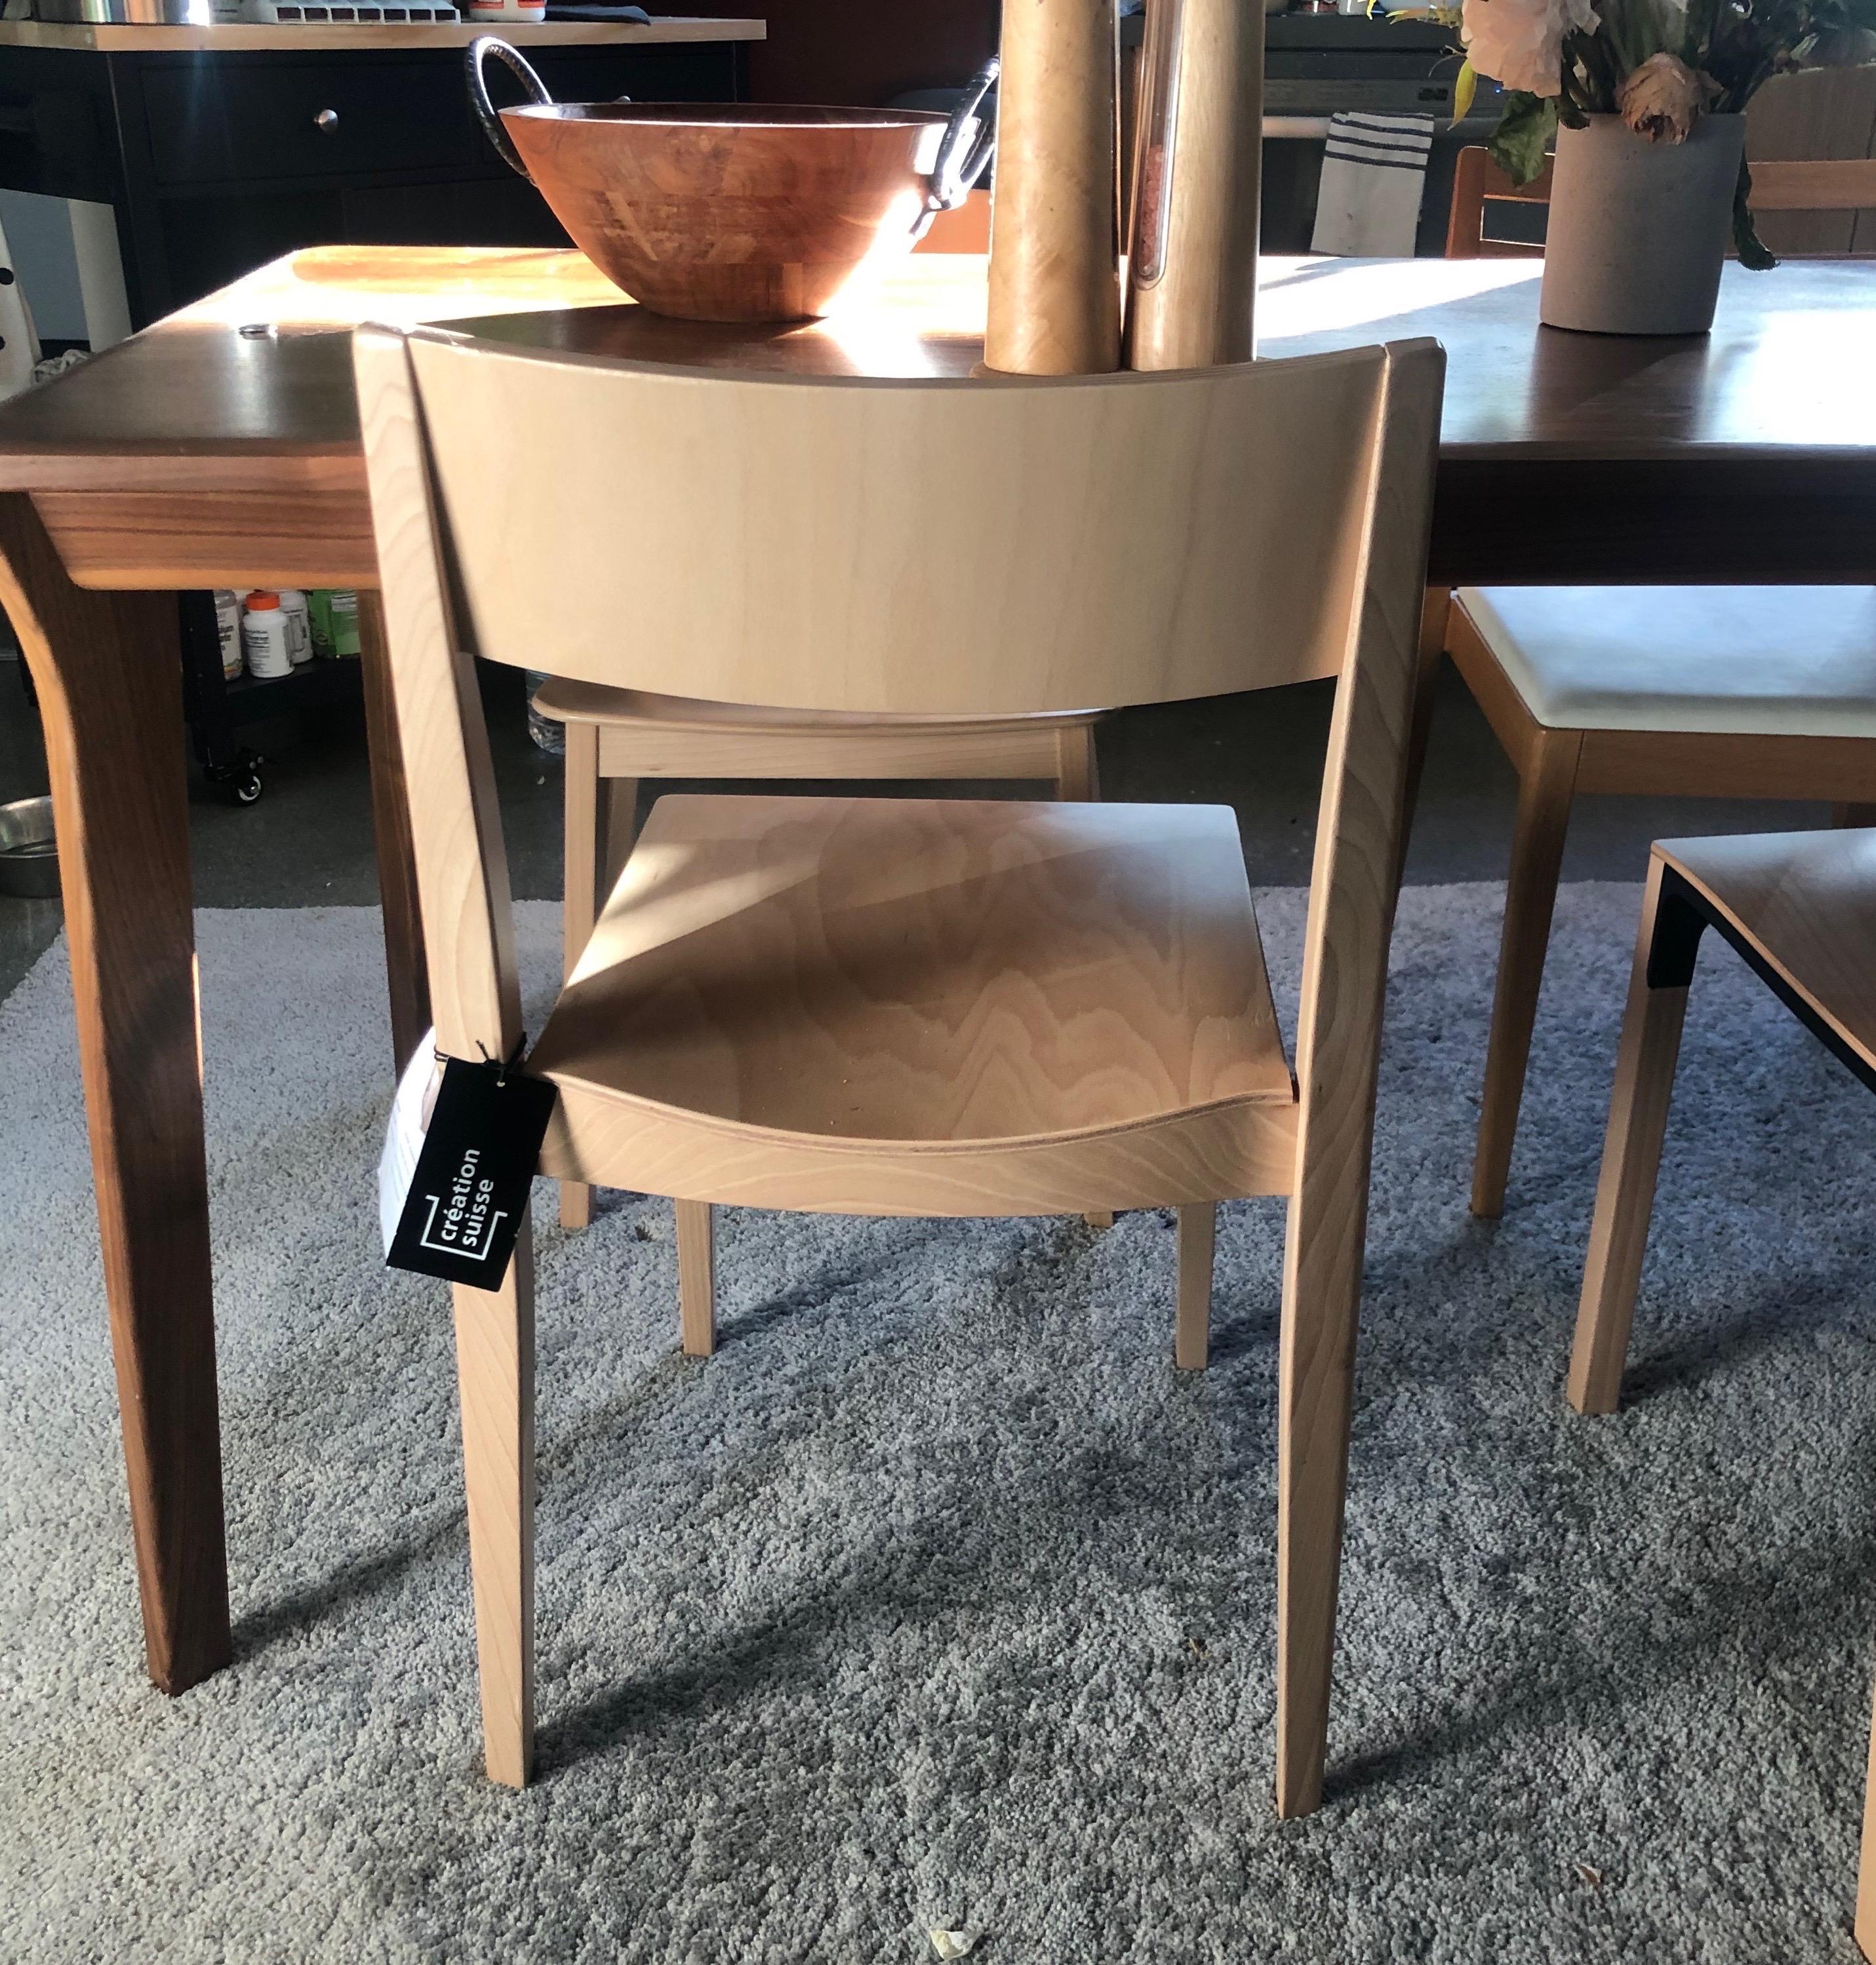 Contemporary Dietiker Soma Minimalist Dining Chair in Beech Wood Designed by Thomas Albrecht